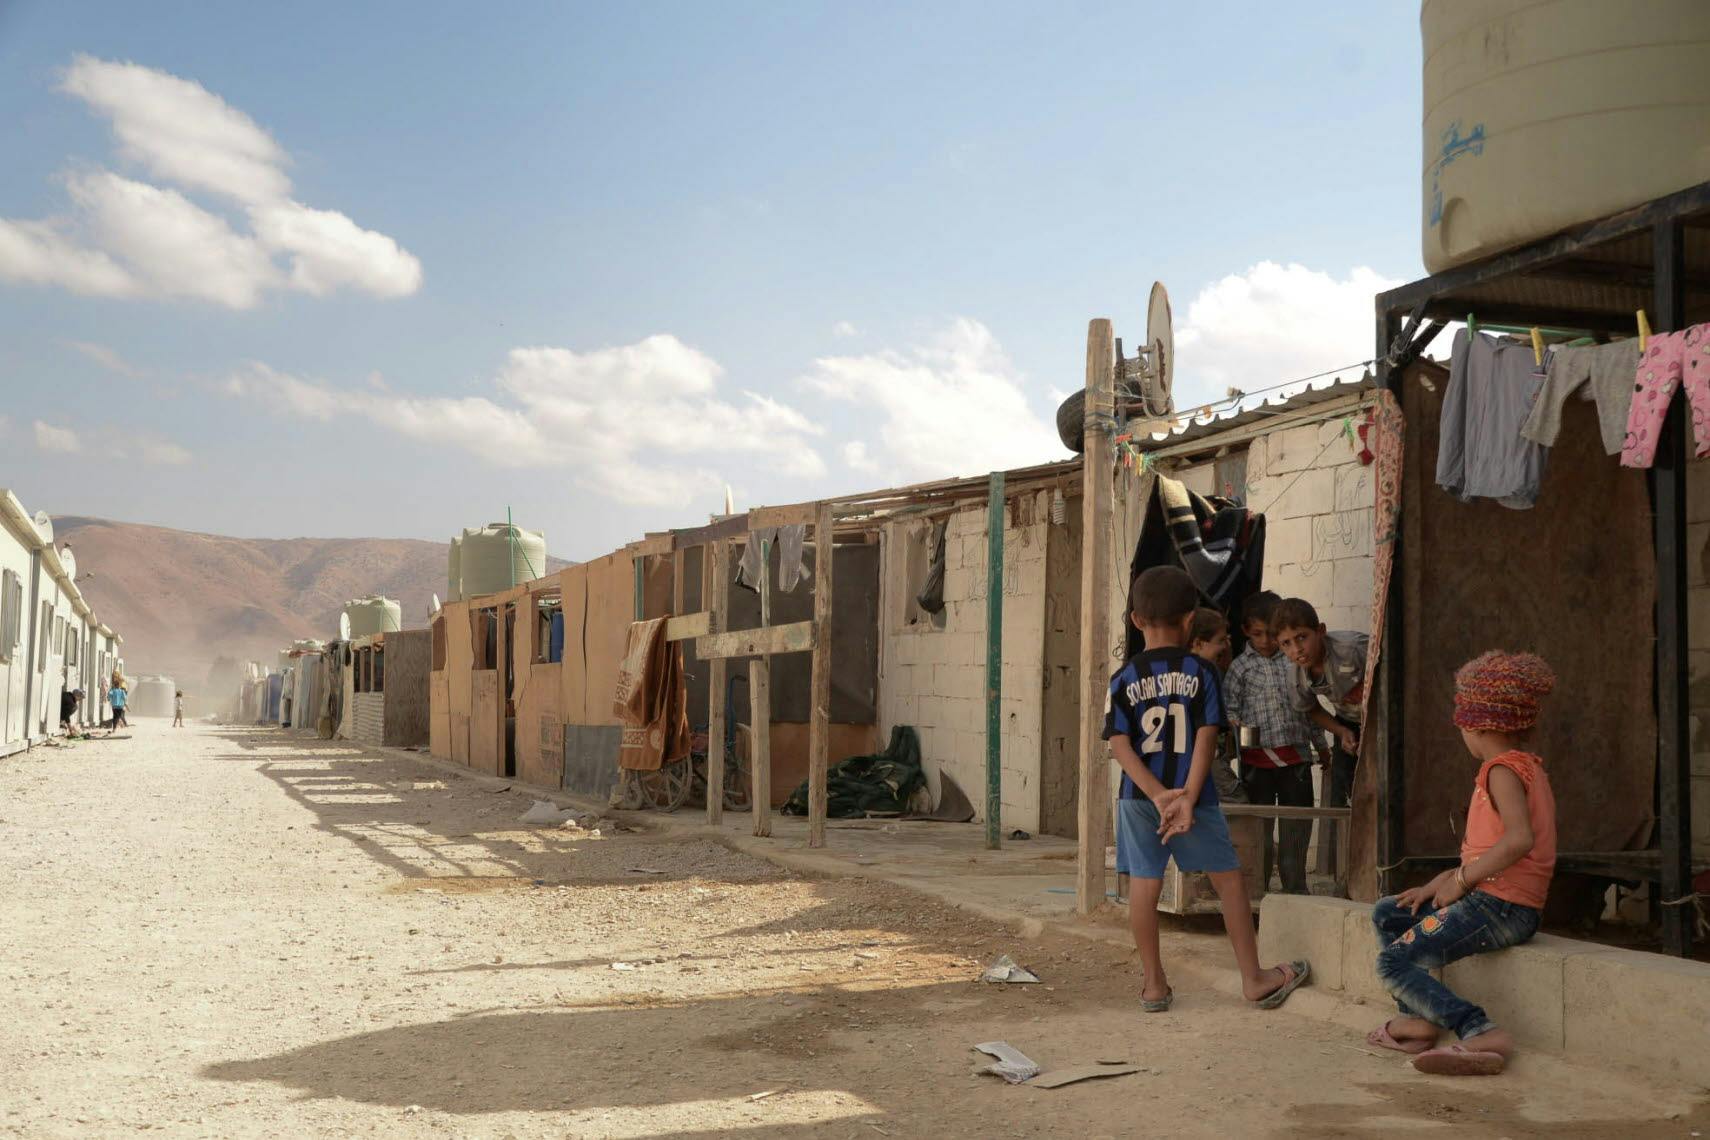 A street with barracks of a camp for displaced people.